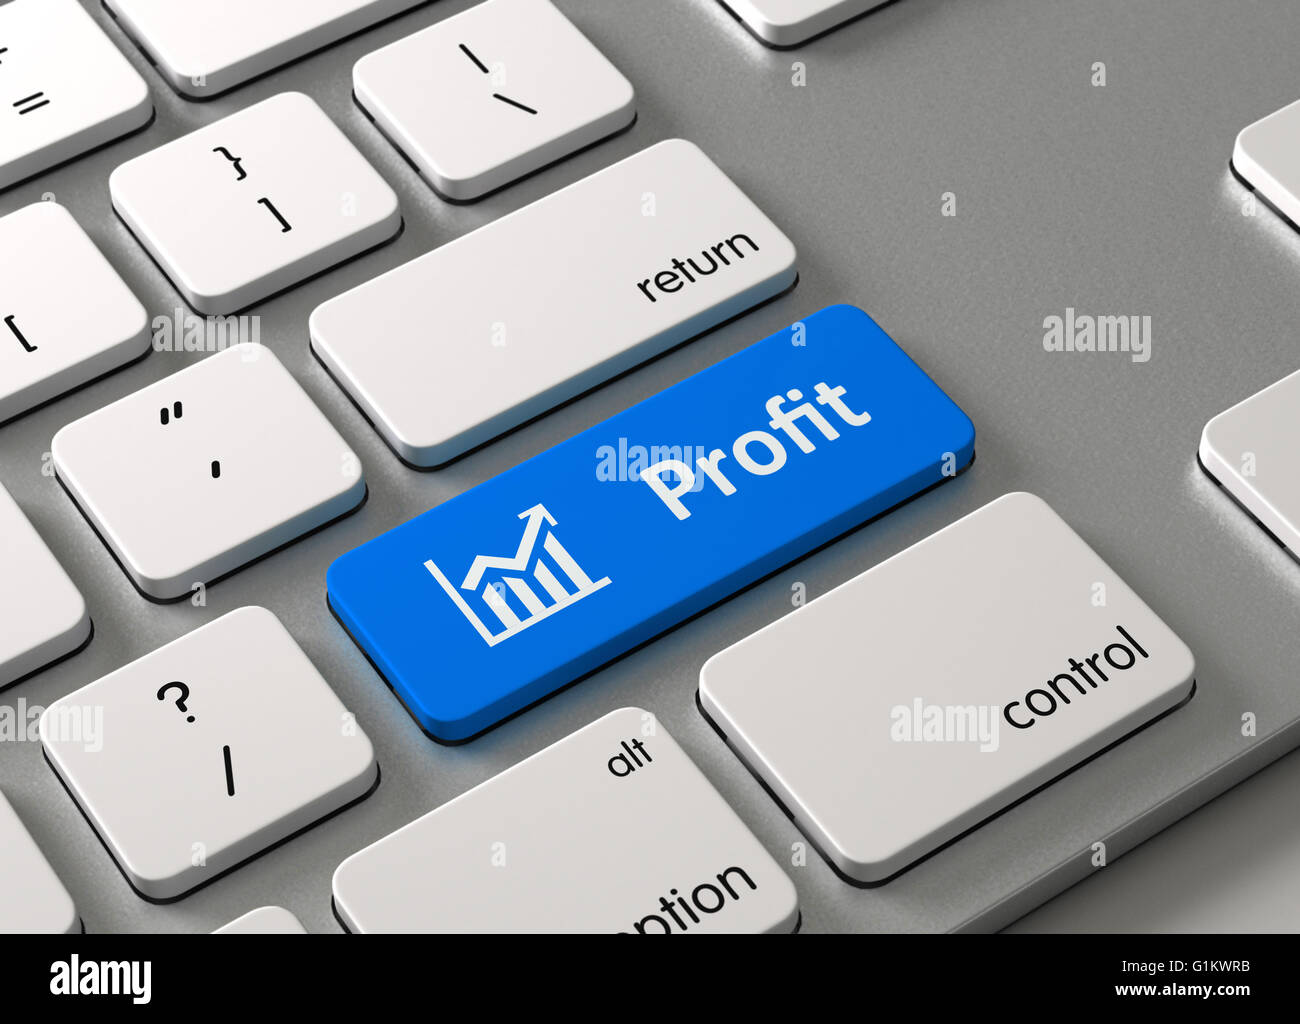 A keyboard with a blue button-Profit Stock Photo